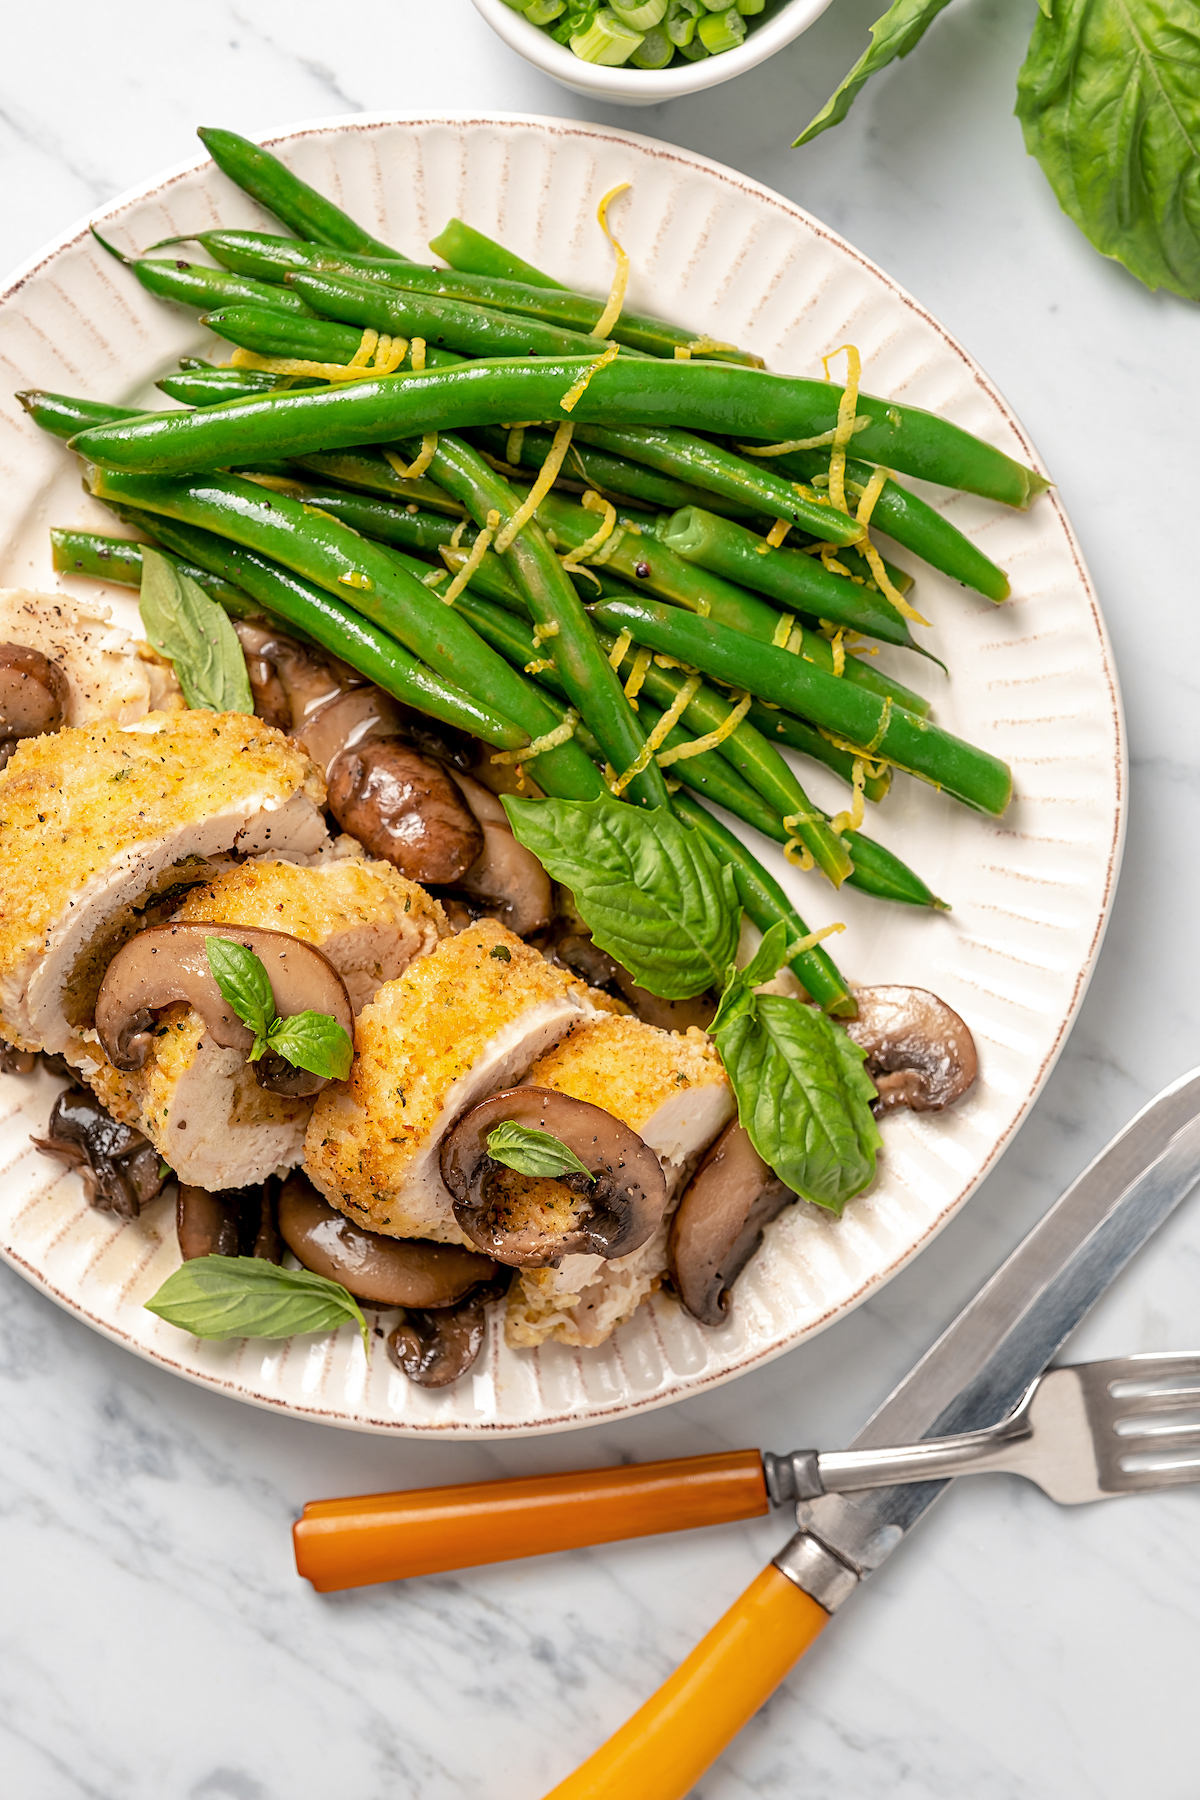 Chicken with mushroom sauce and green beans.